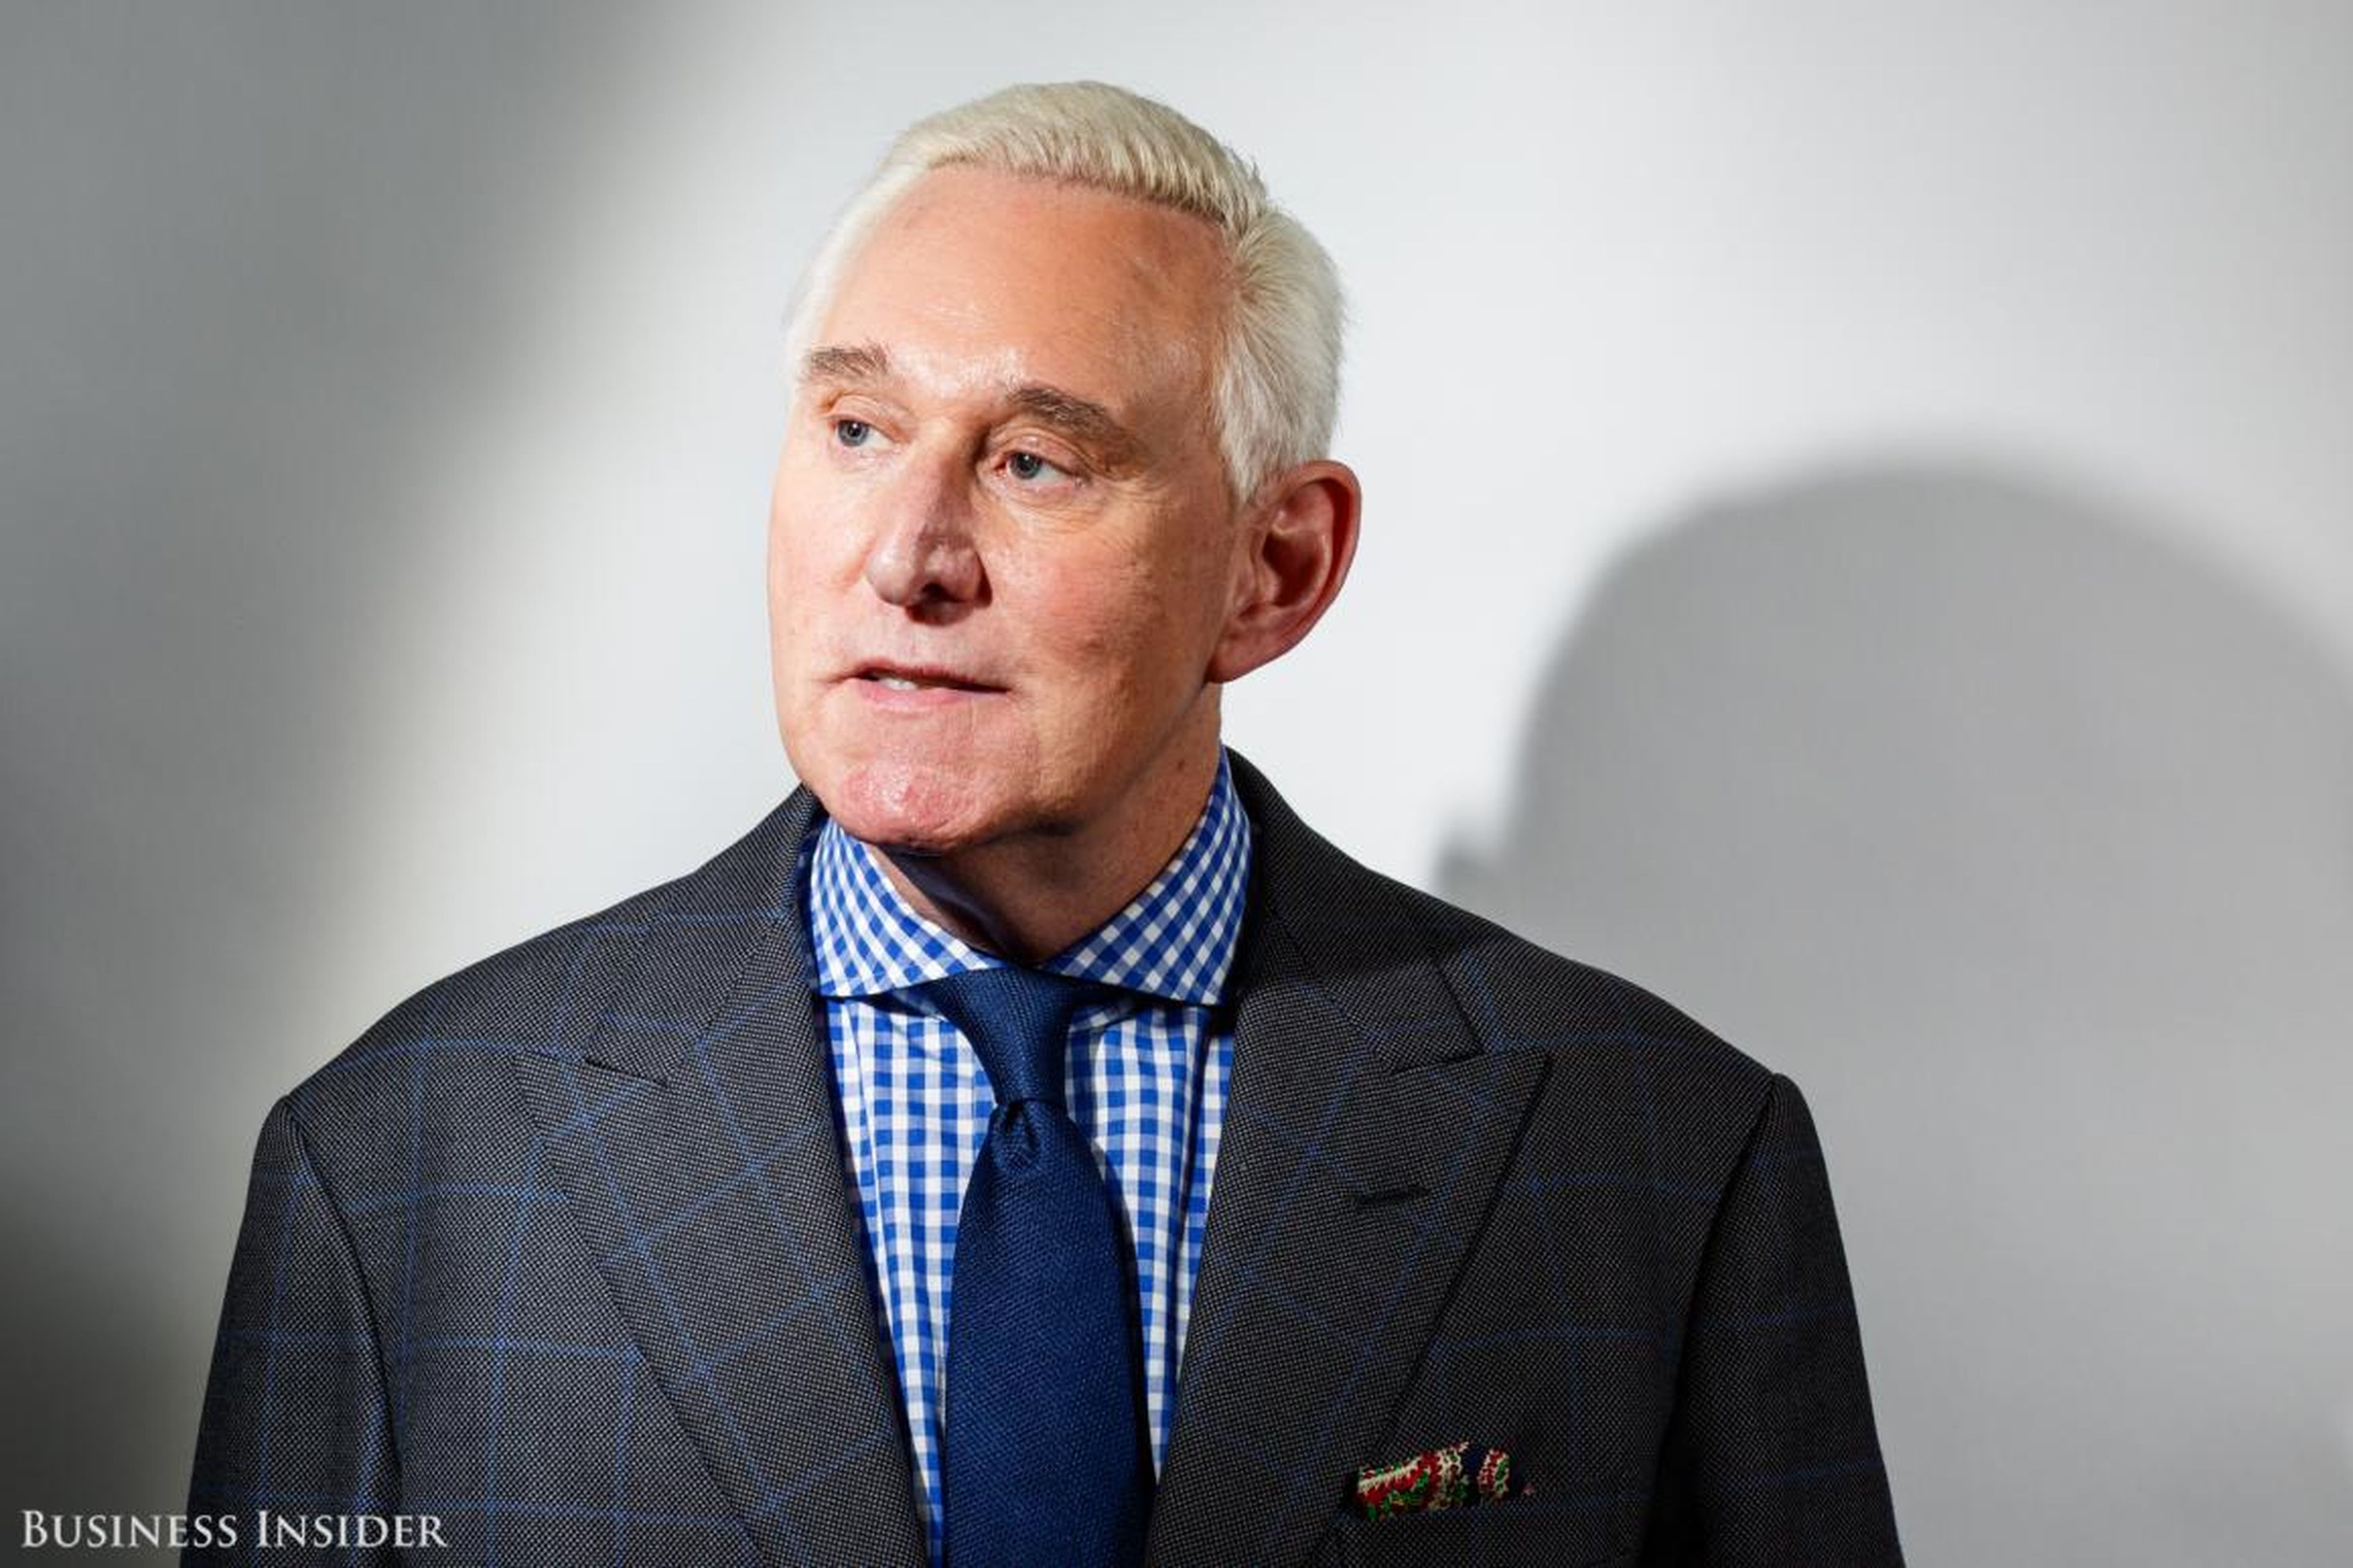 Trump ally and informal campaign advisor Roger Stone